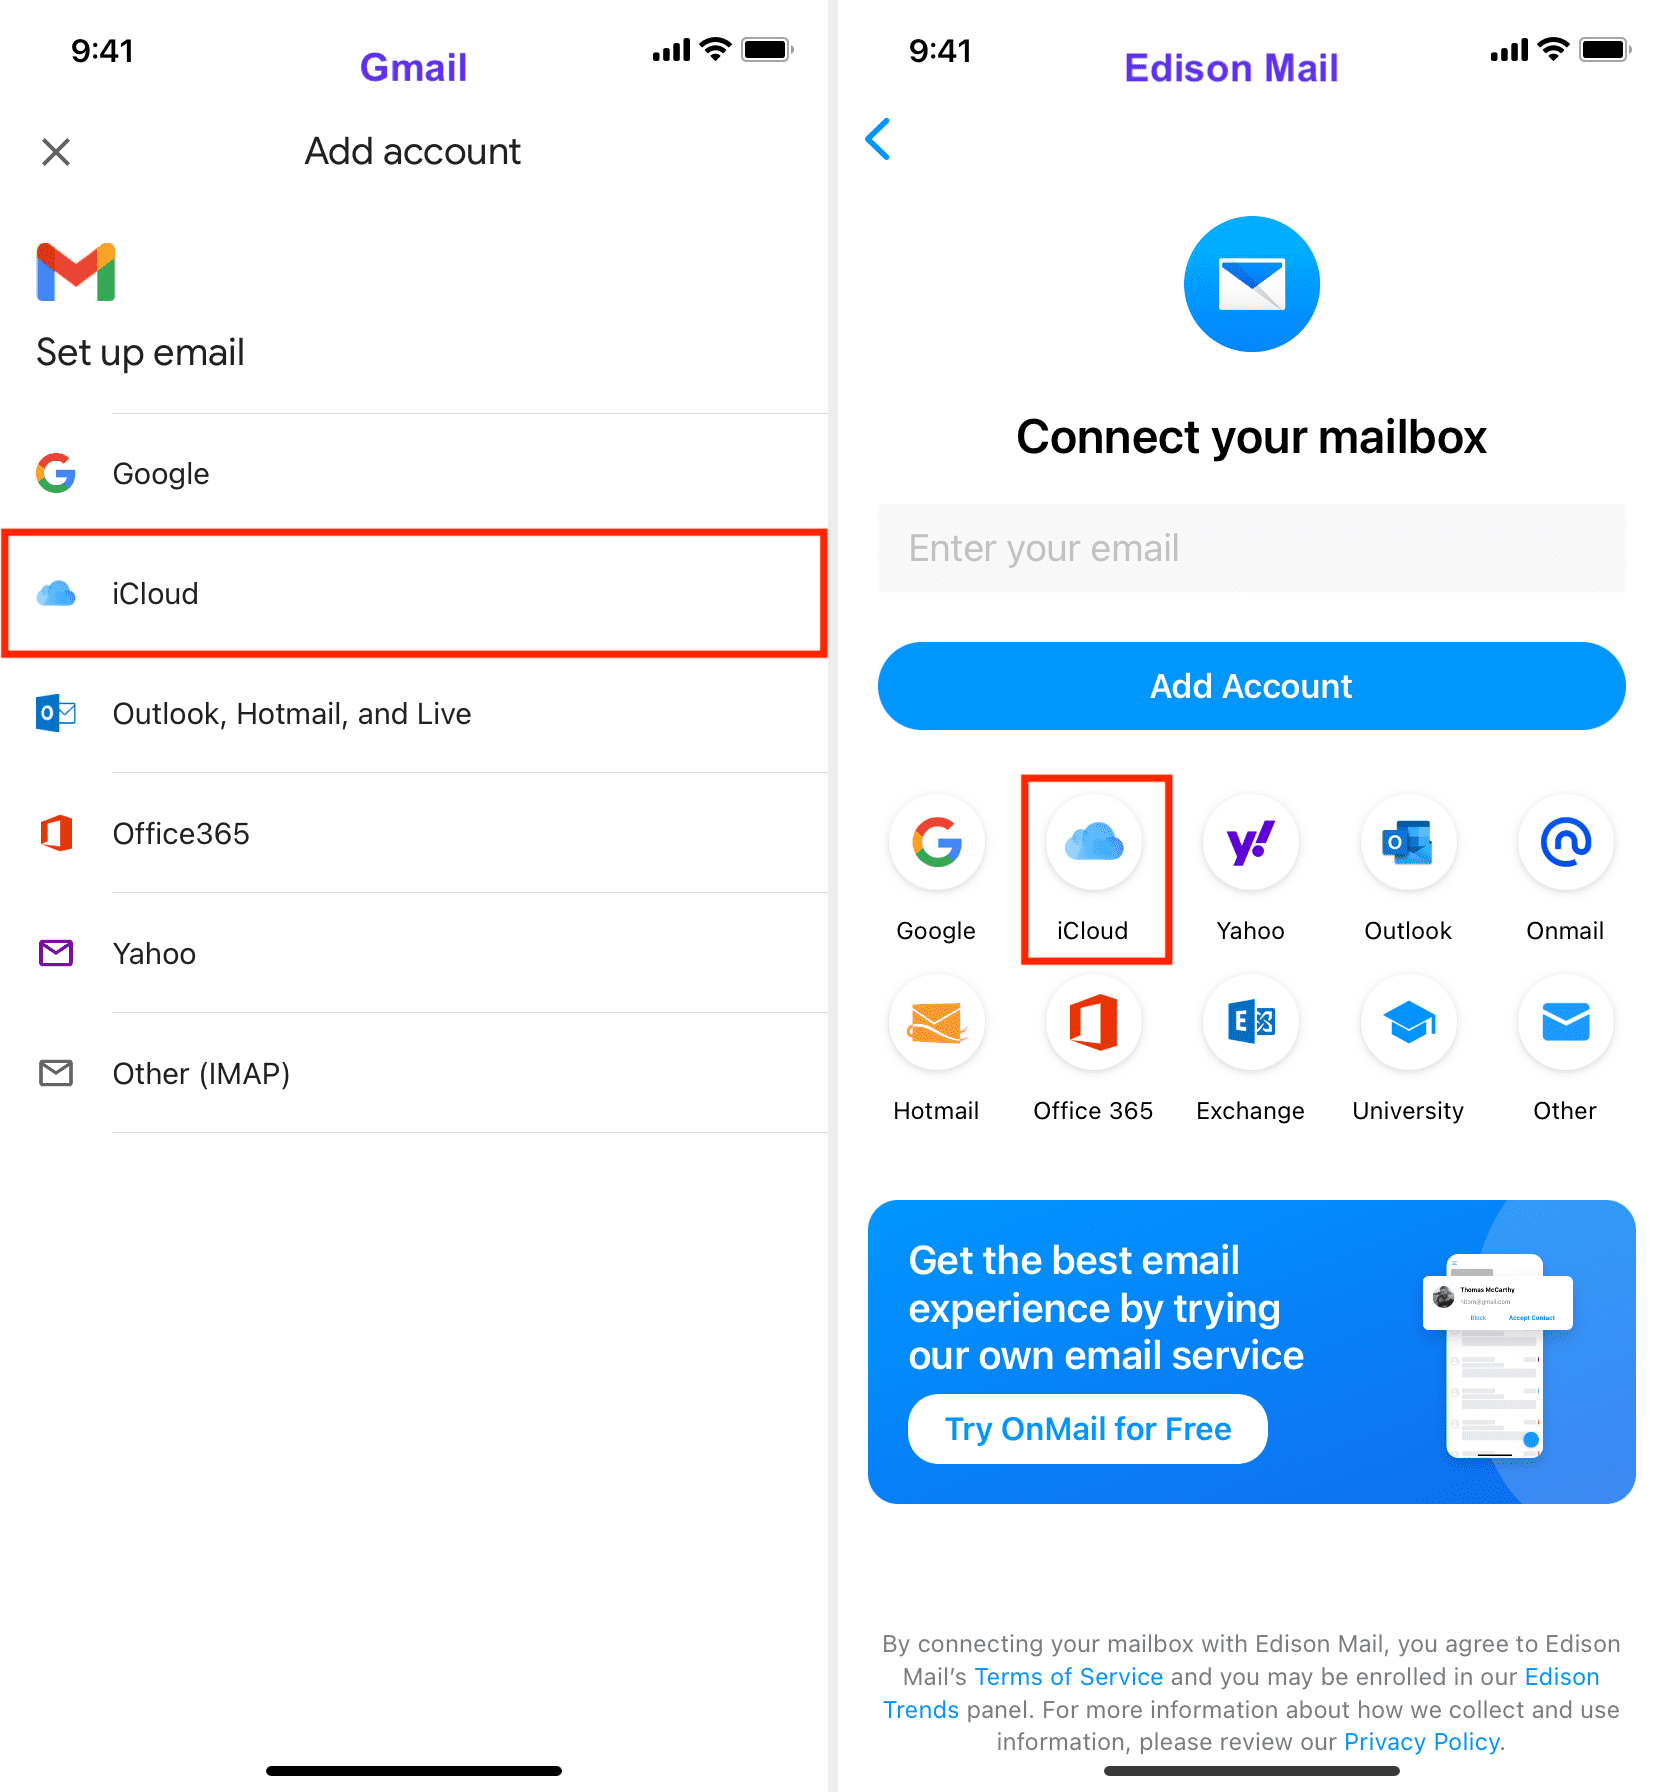 iCloud option in Gmail and Edison Mail apps on iPhone